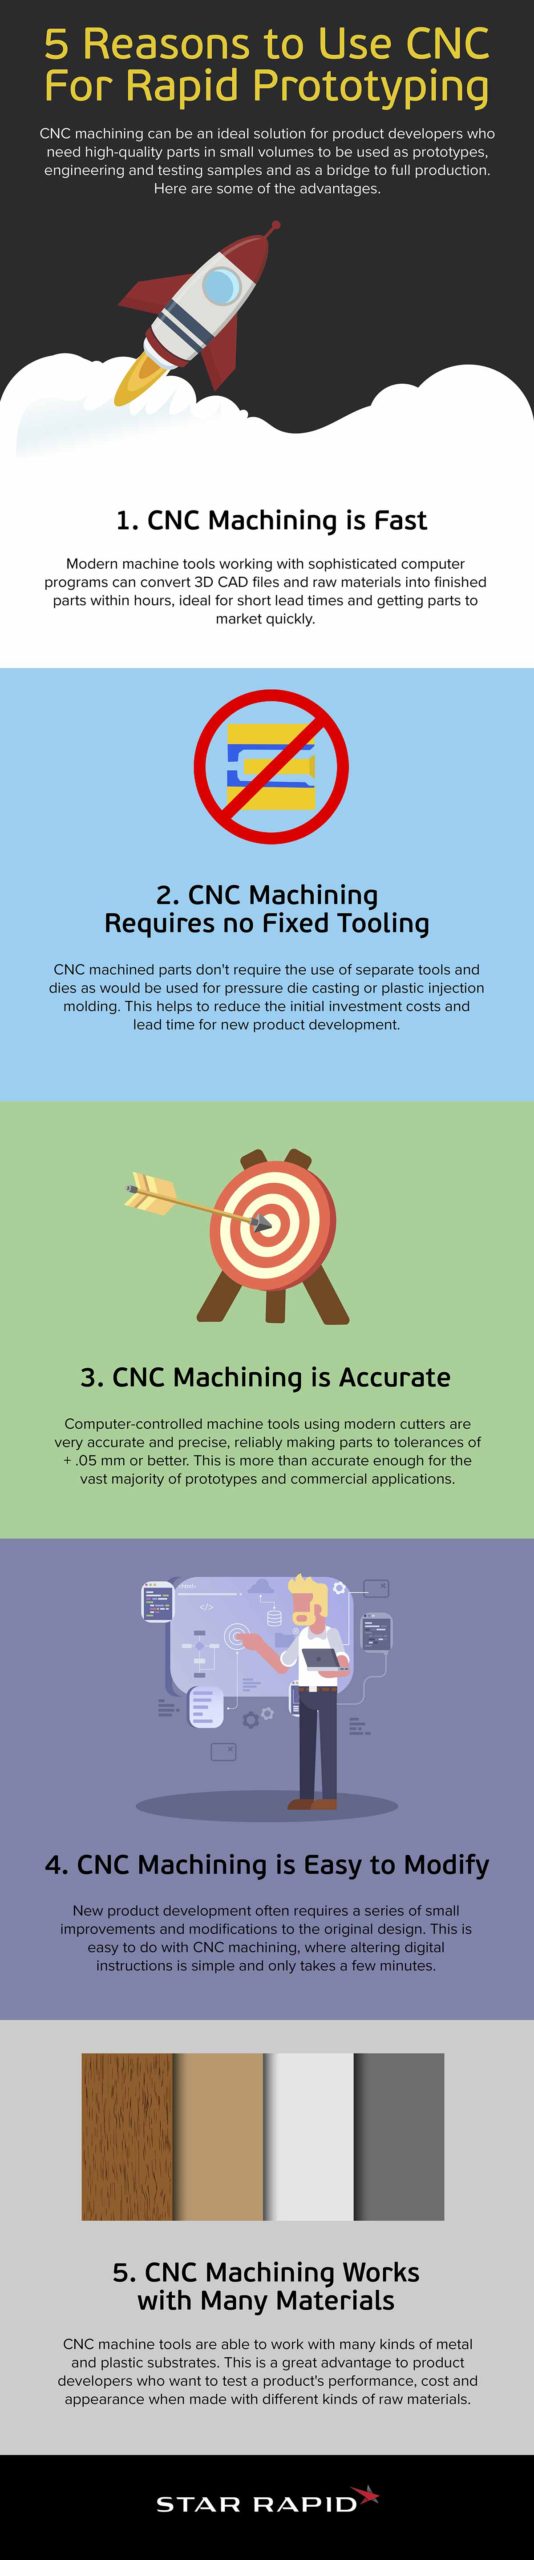 CNC Medical Industry Infographic Image